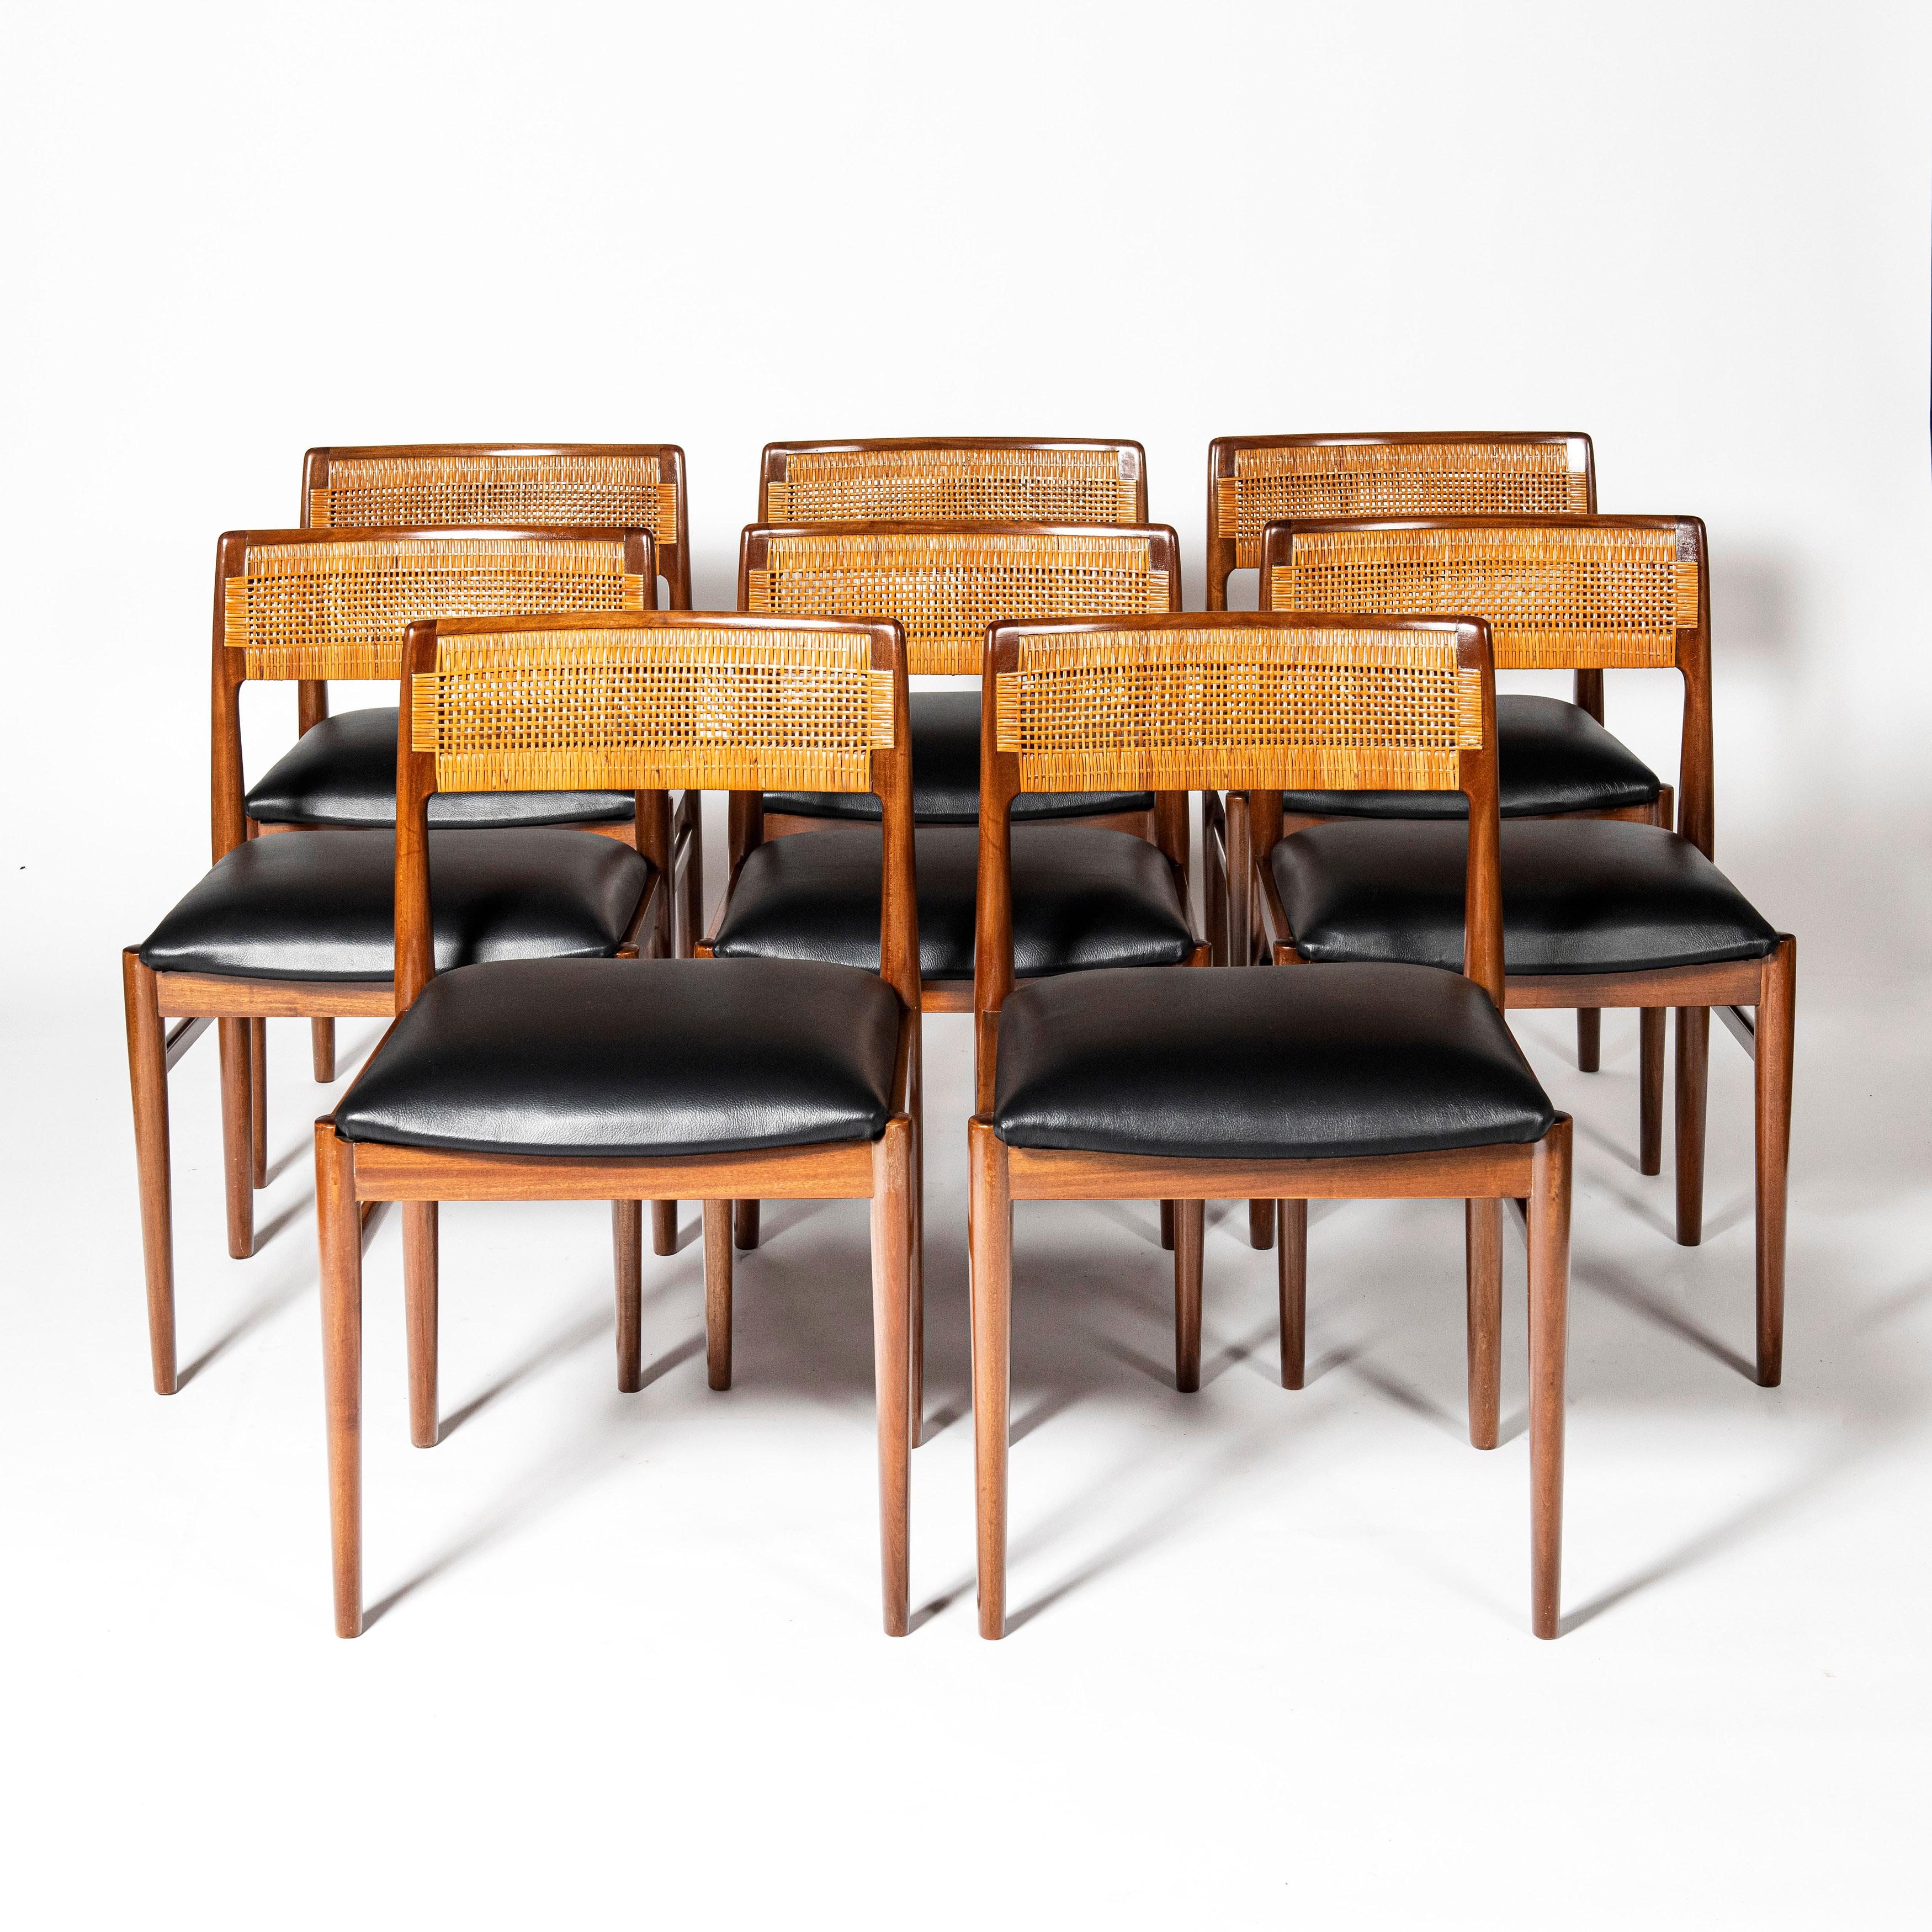 Mid-Century Modern Dining Room Set for 8 People Attributed to Erik Worts, Denmark, circa, 1960